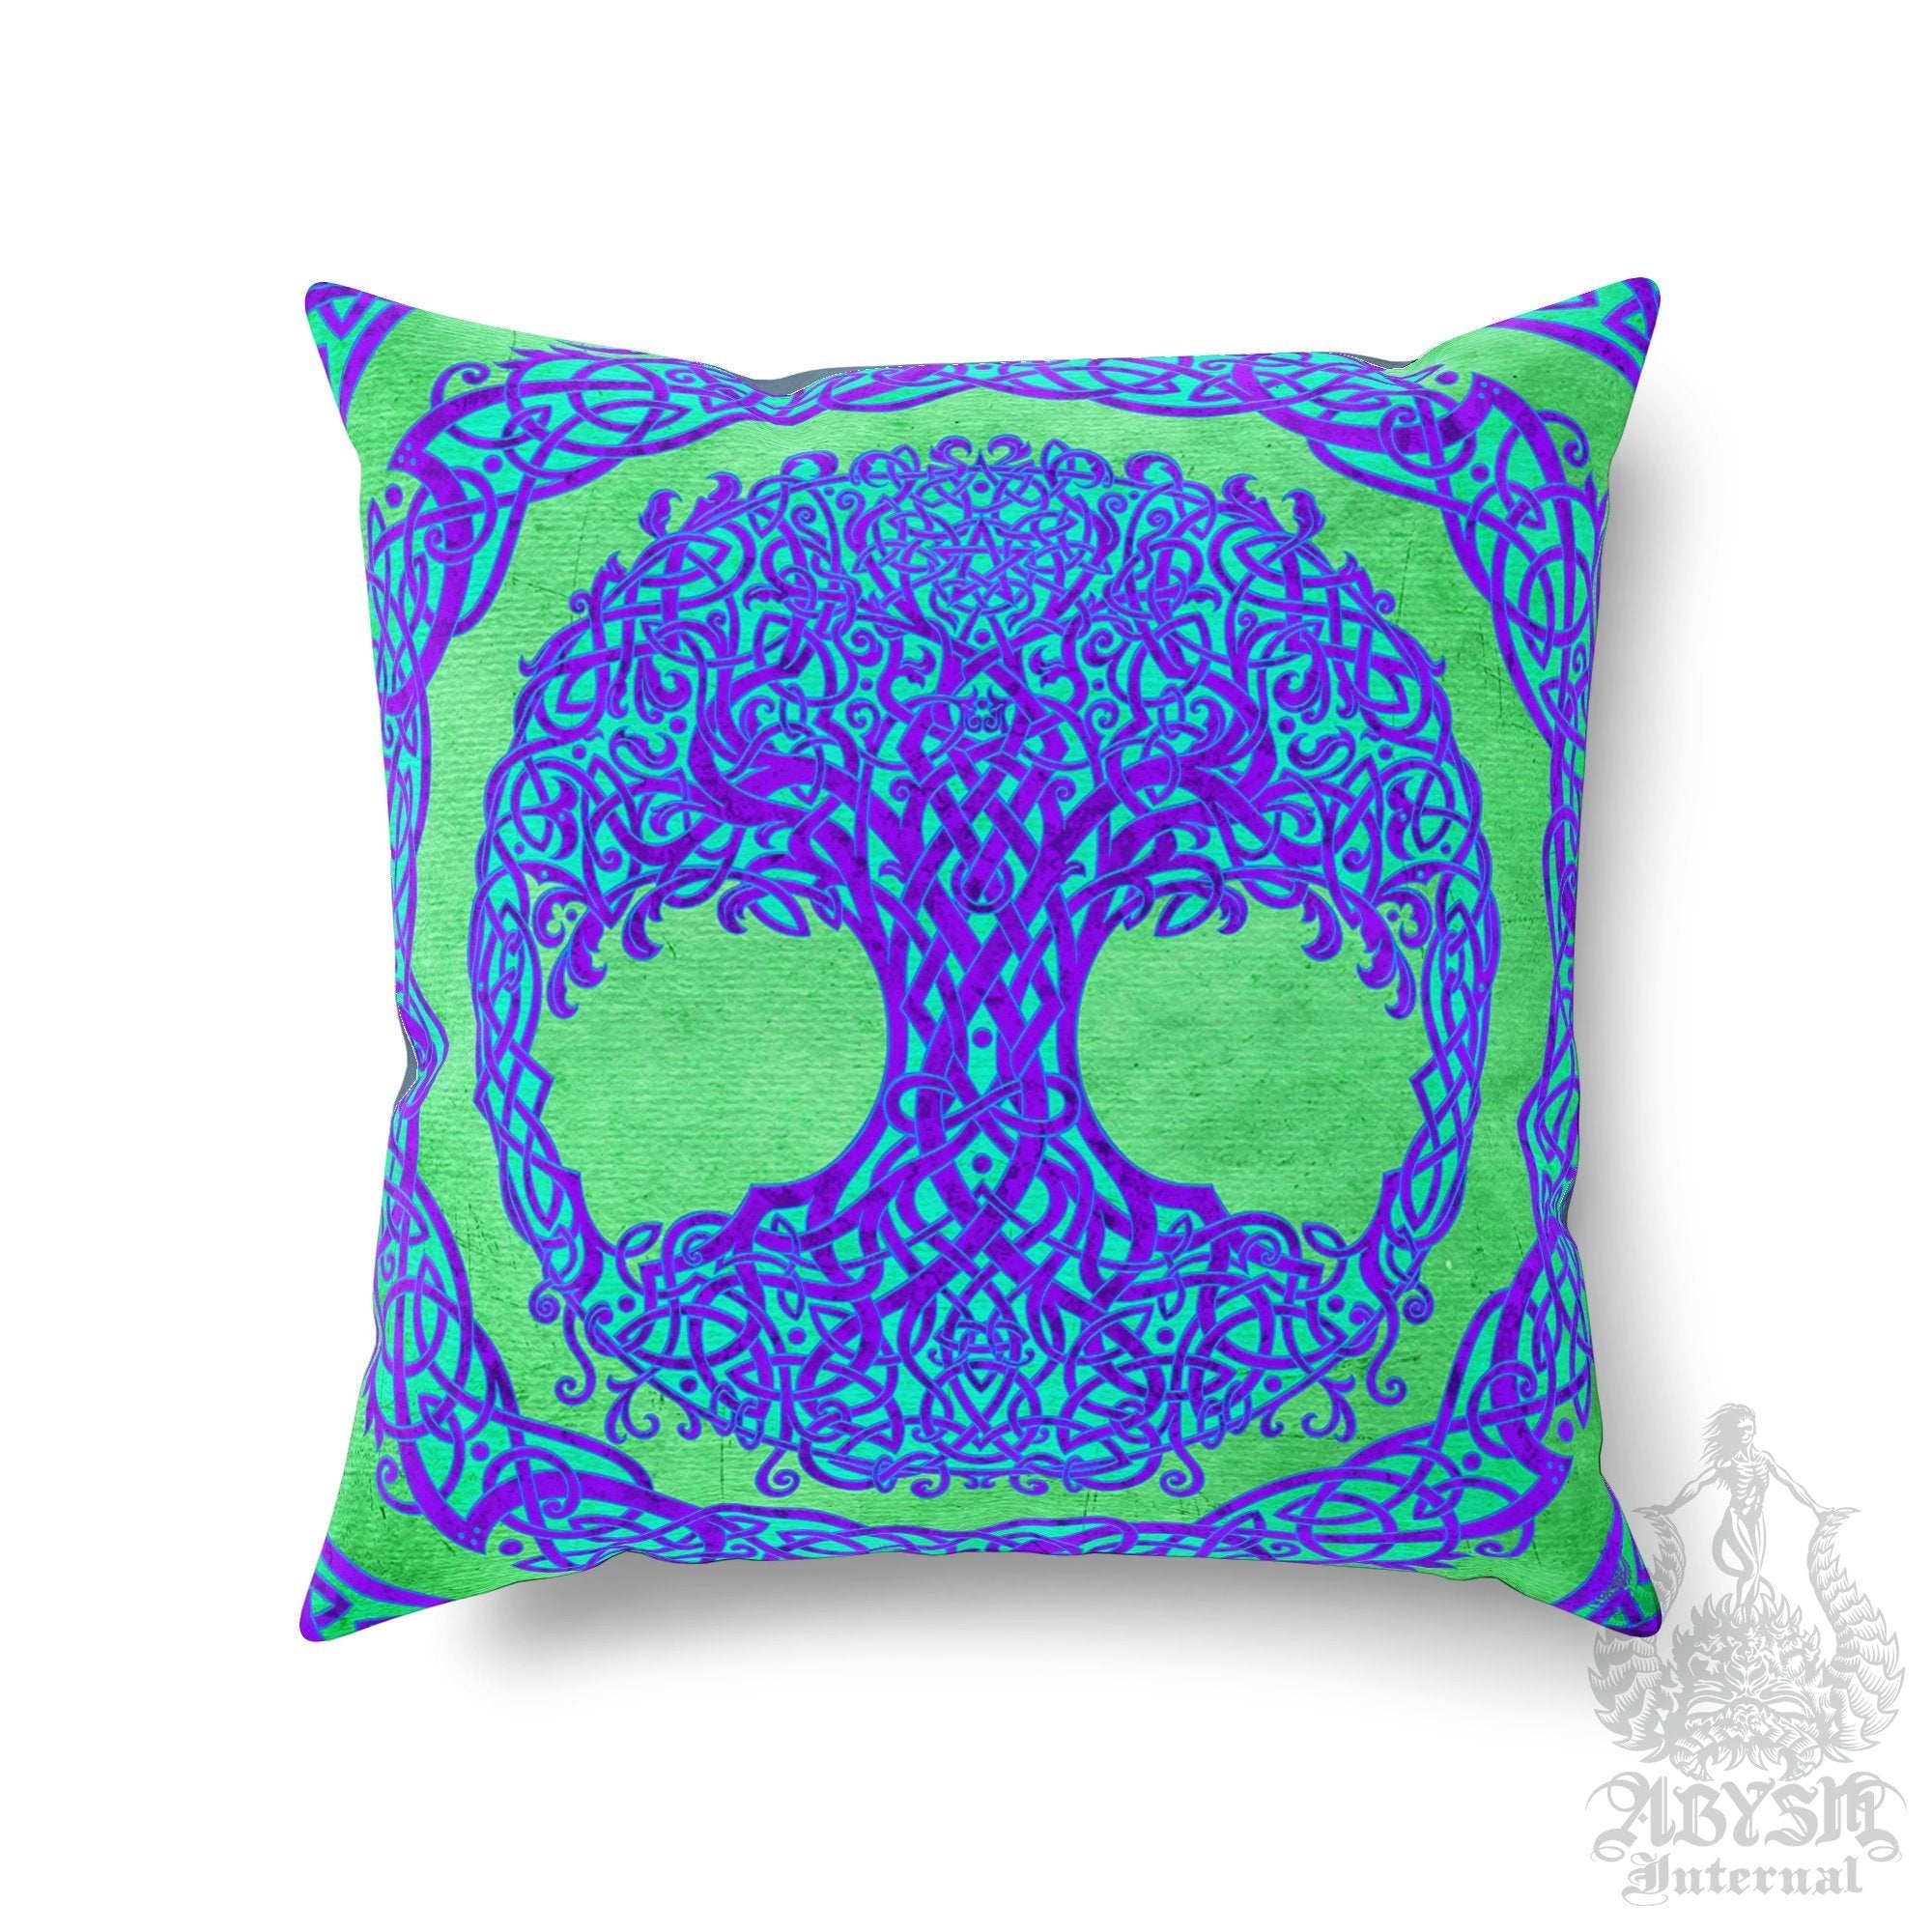 Tree of Life Throw Pillow, Decorative Accent Cushion, Wicca, Pagan Room Decor, Witchy Art, Celtic Knot, Funky and Eclectic Home - Psy - Abysm Internal